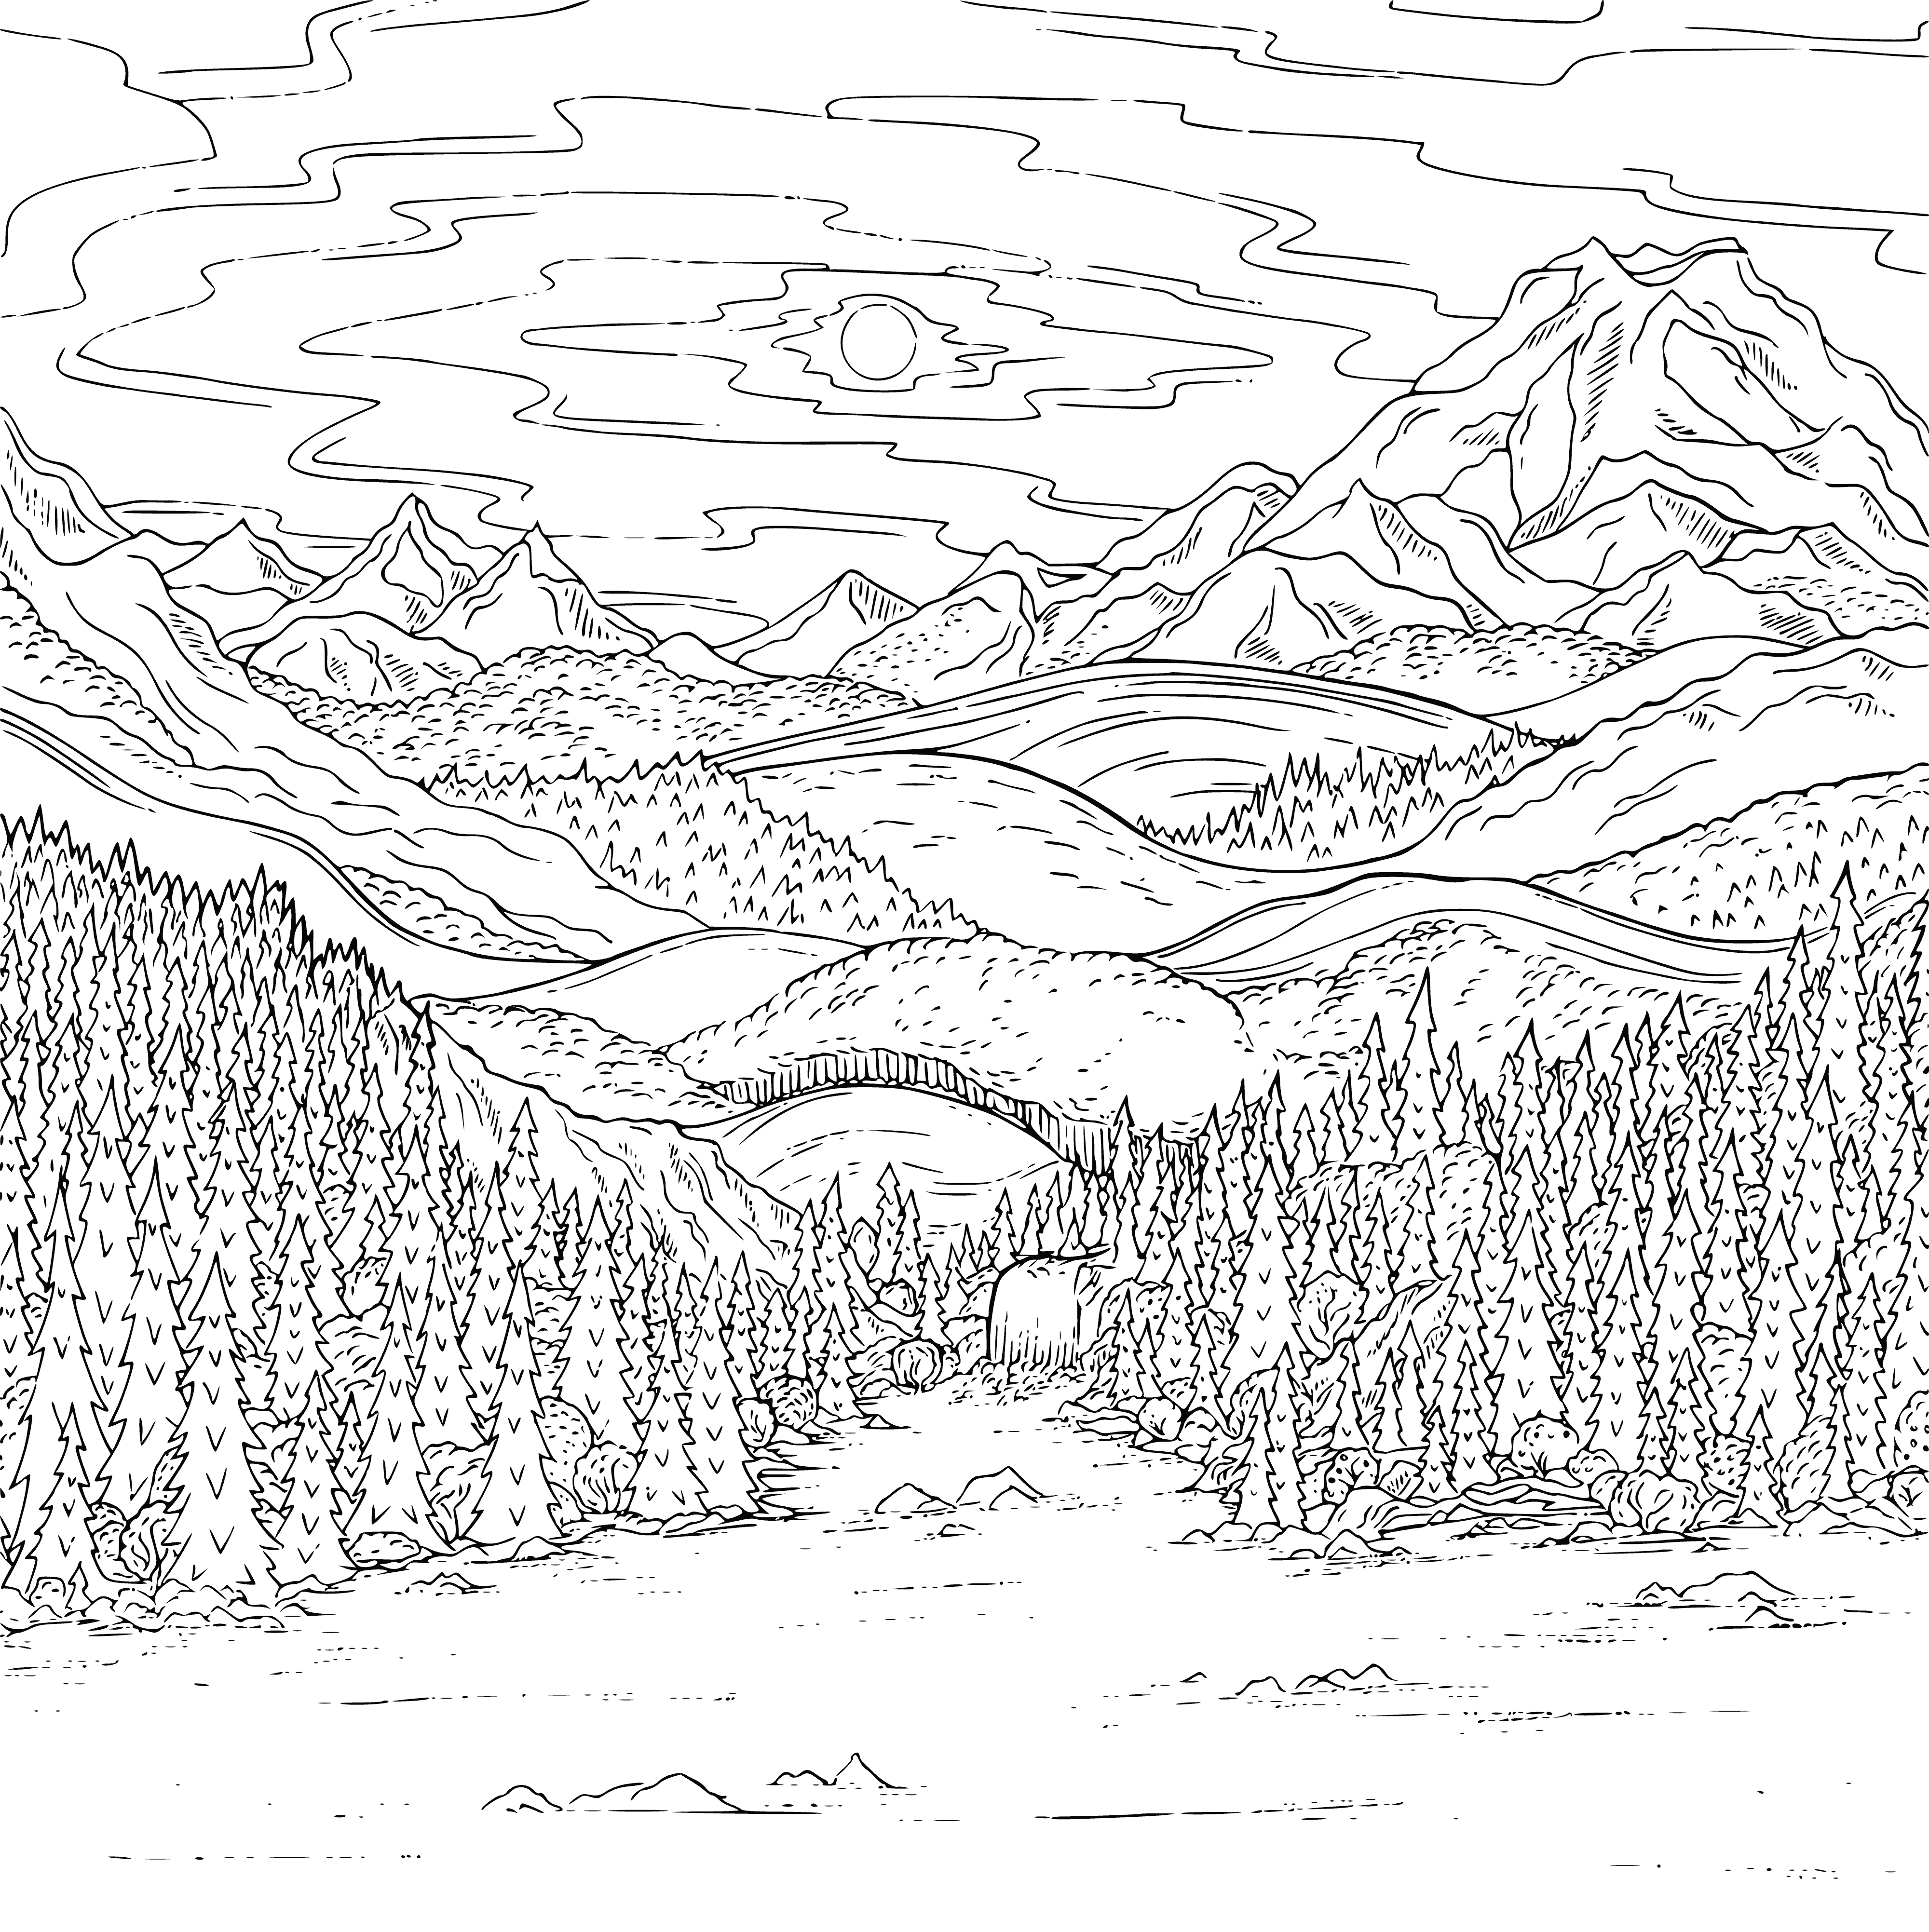 coloring page: A majestic mountain range standing in the distance, its peaks hidden in clouds, surrounded by a foggy sea and a vibrant, flower-filled valley. A serene, peaceful sight.